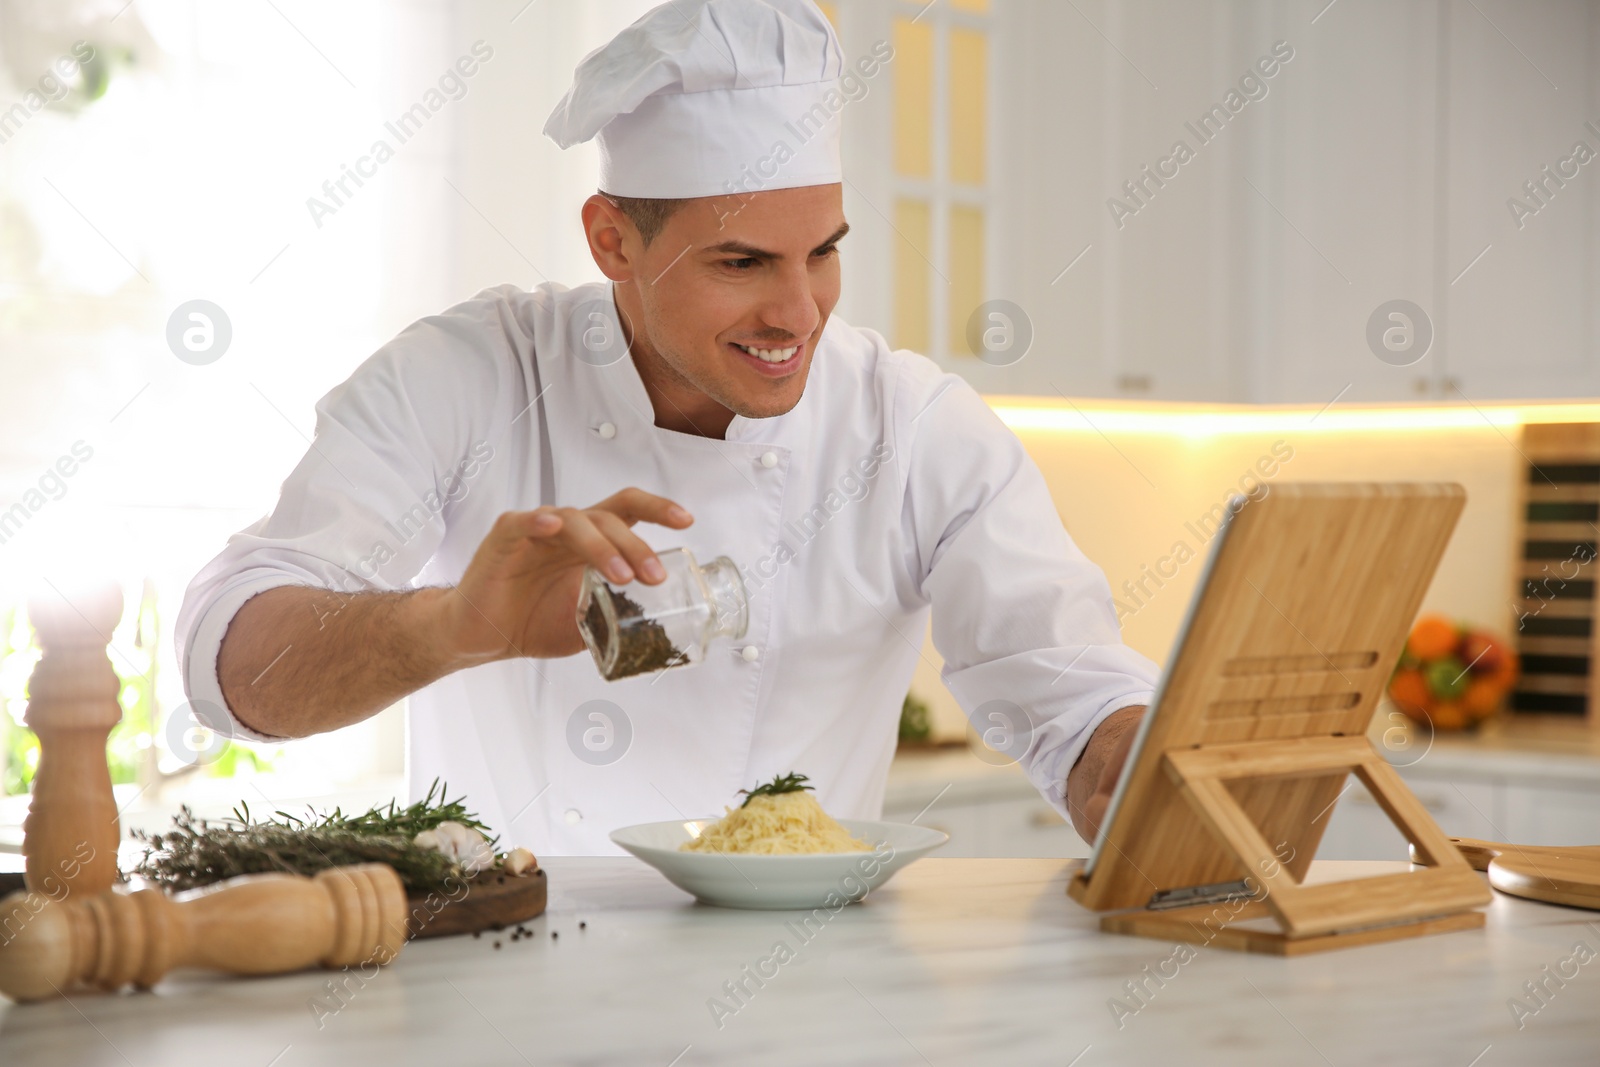 Photo of Chef with tablet cooking at table in kitchen